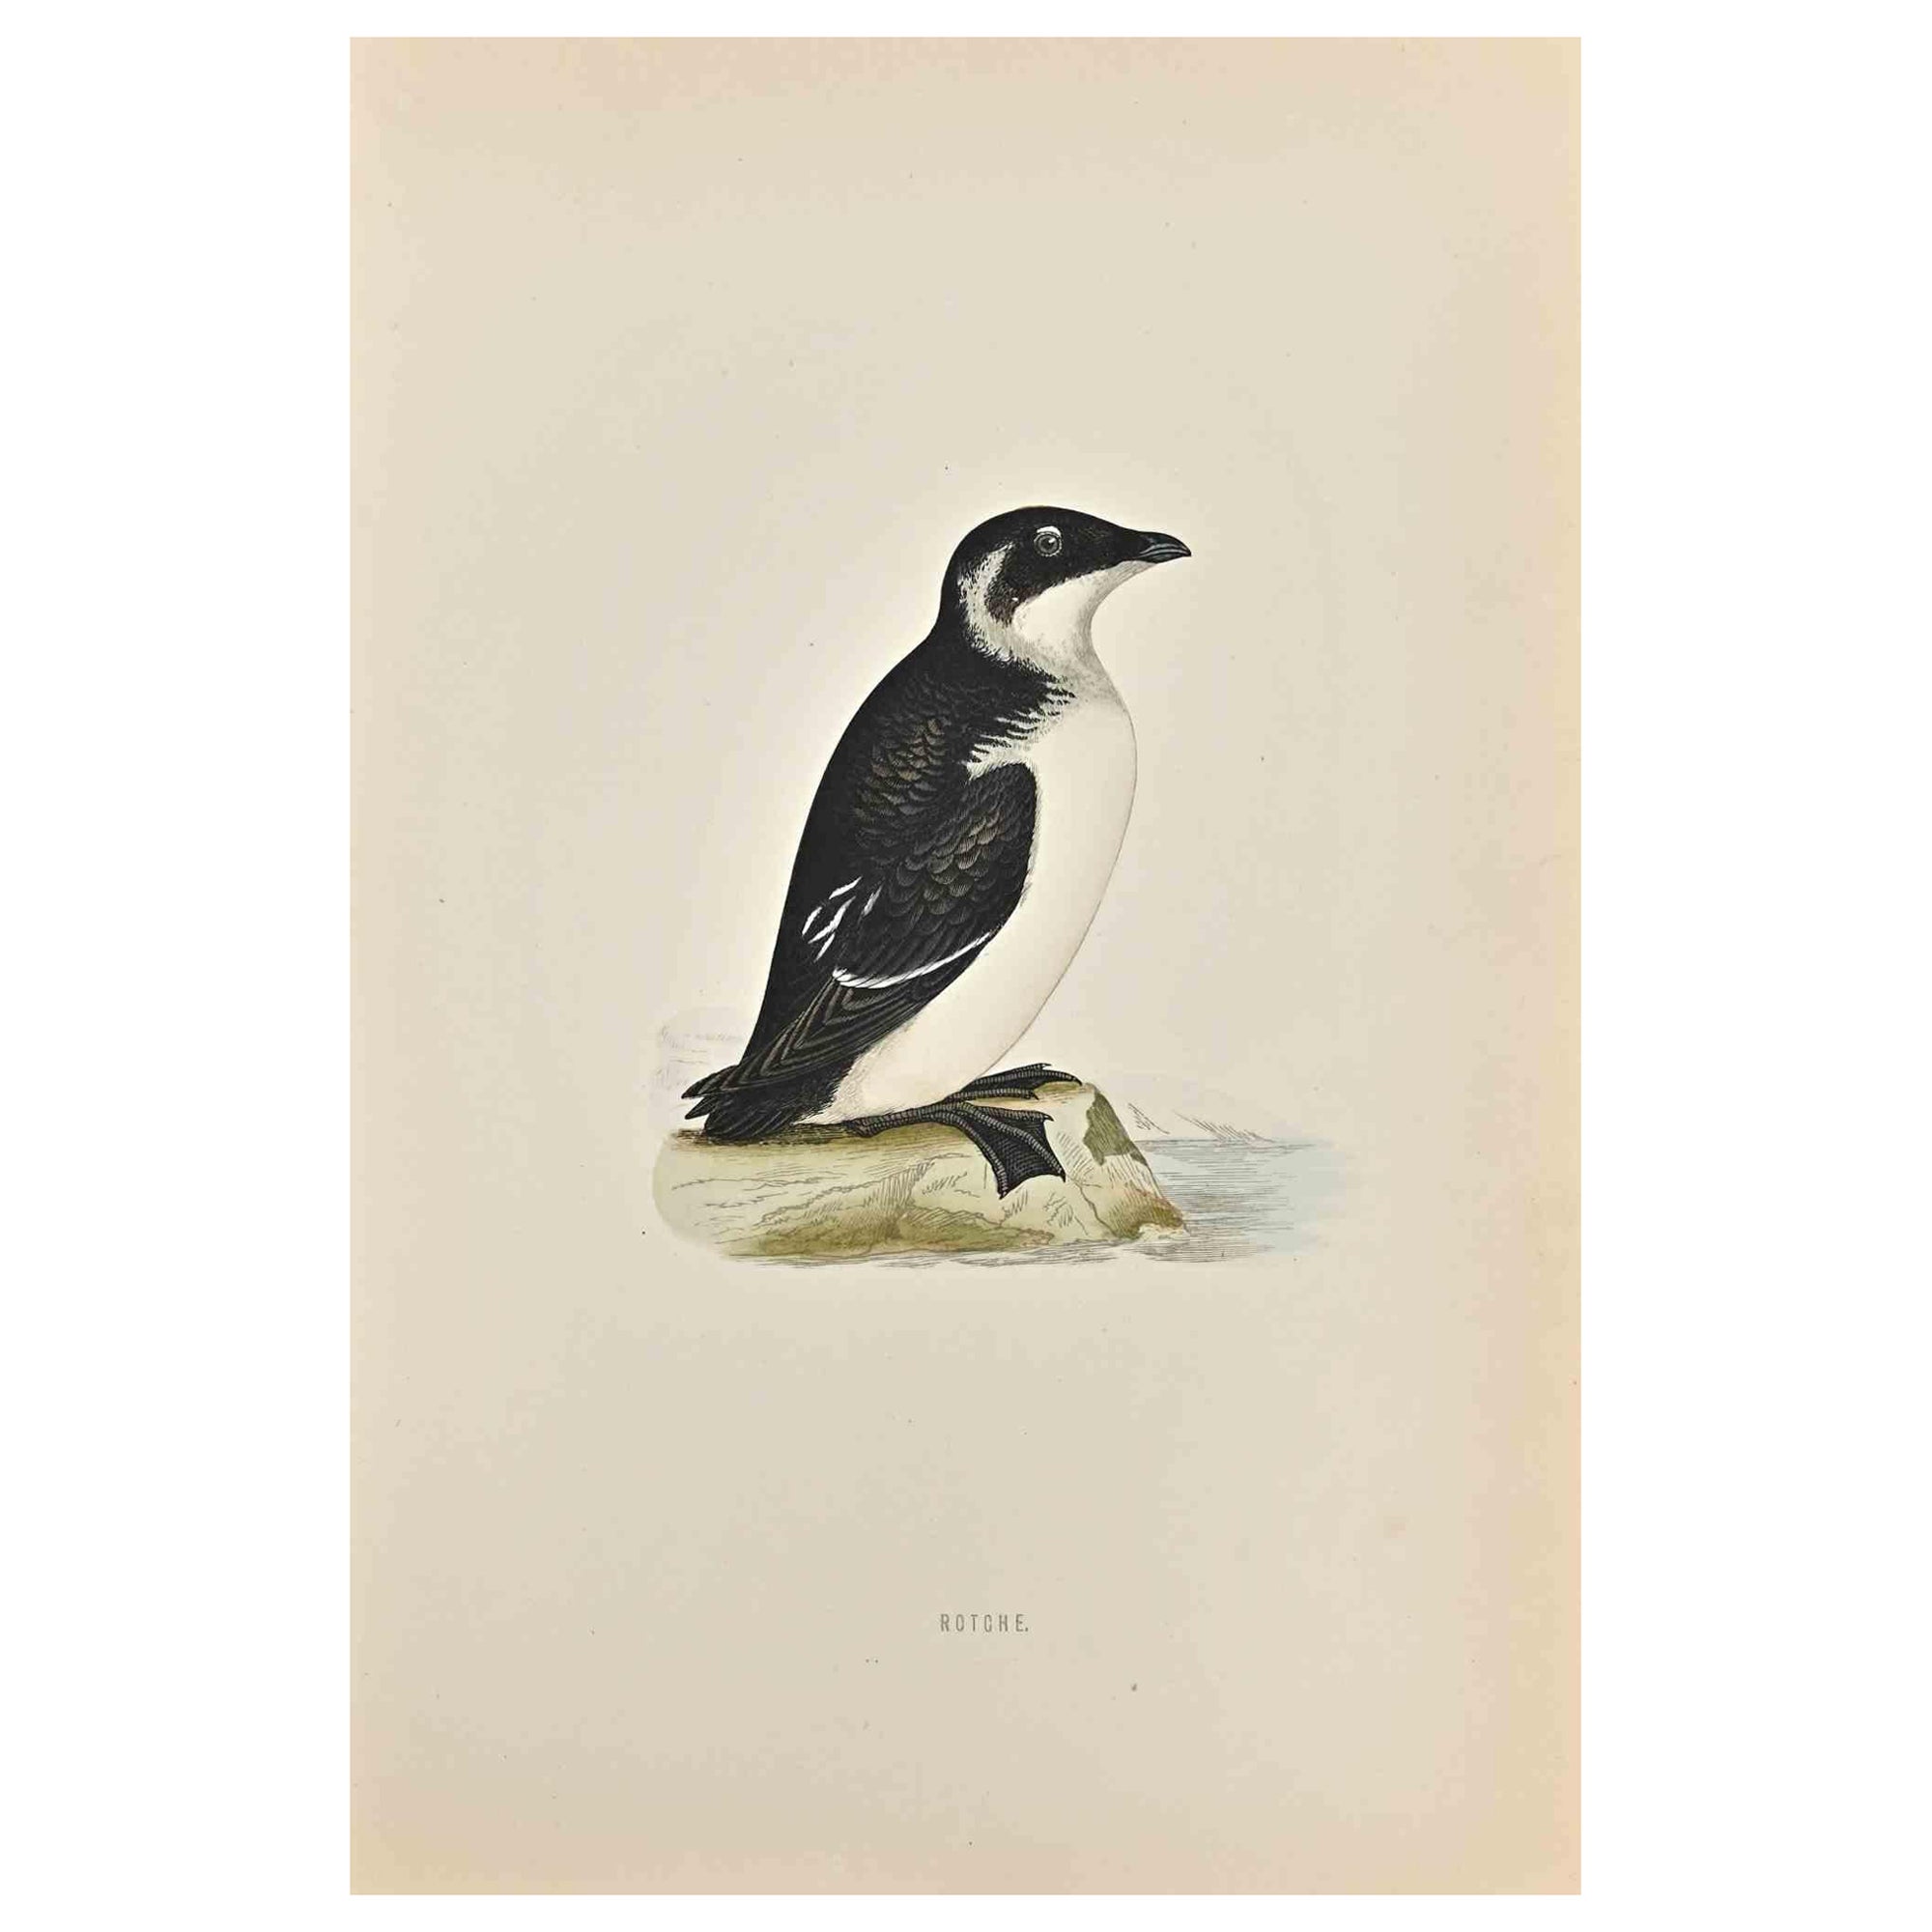 Rotche is a modern artwork realized in 1870 by the British artist Alexander Francis Lydon (1836-1917).

Woodcut print on ivory-colored paper.

Hand-colored, published by London, Bell & Sons, 1870.  

The name of the bird is printed on the plate.